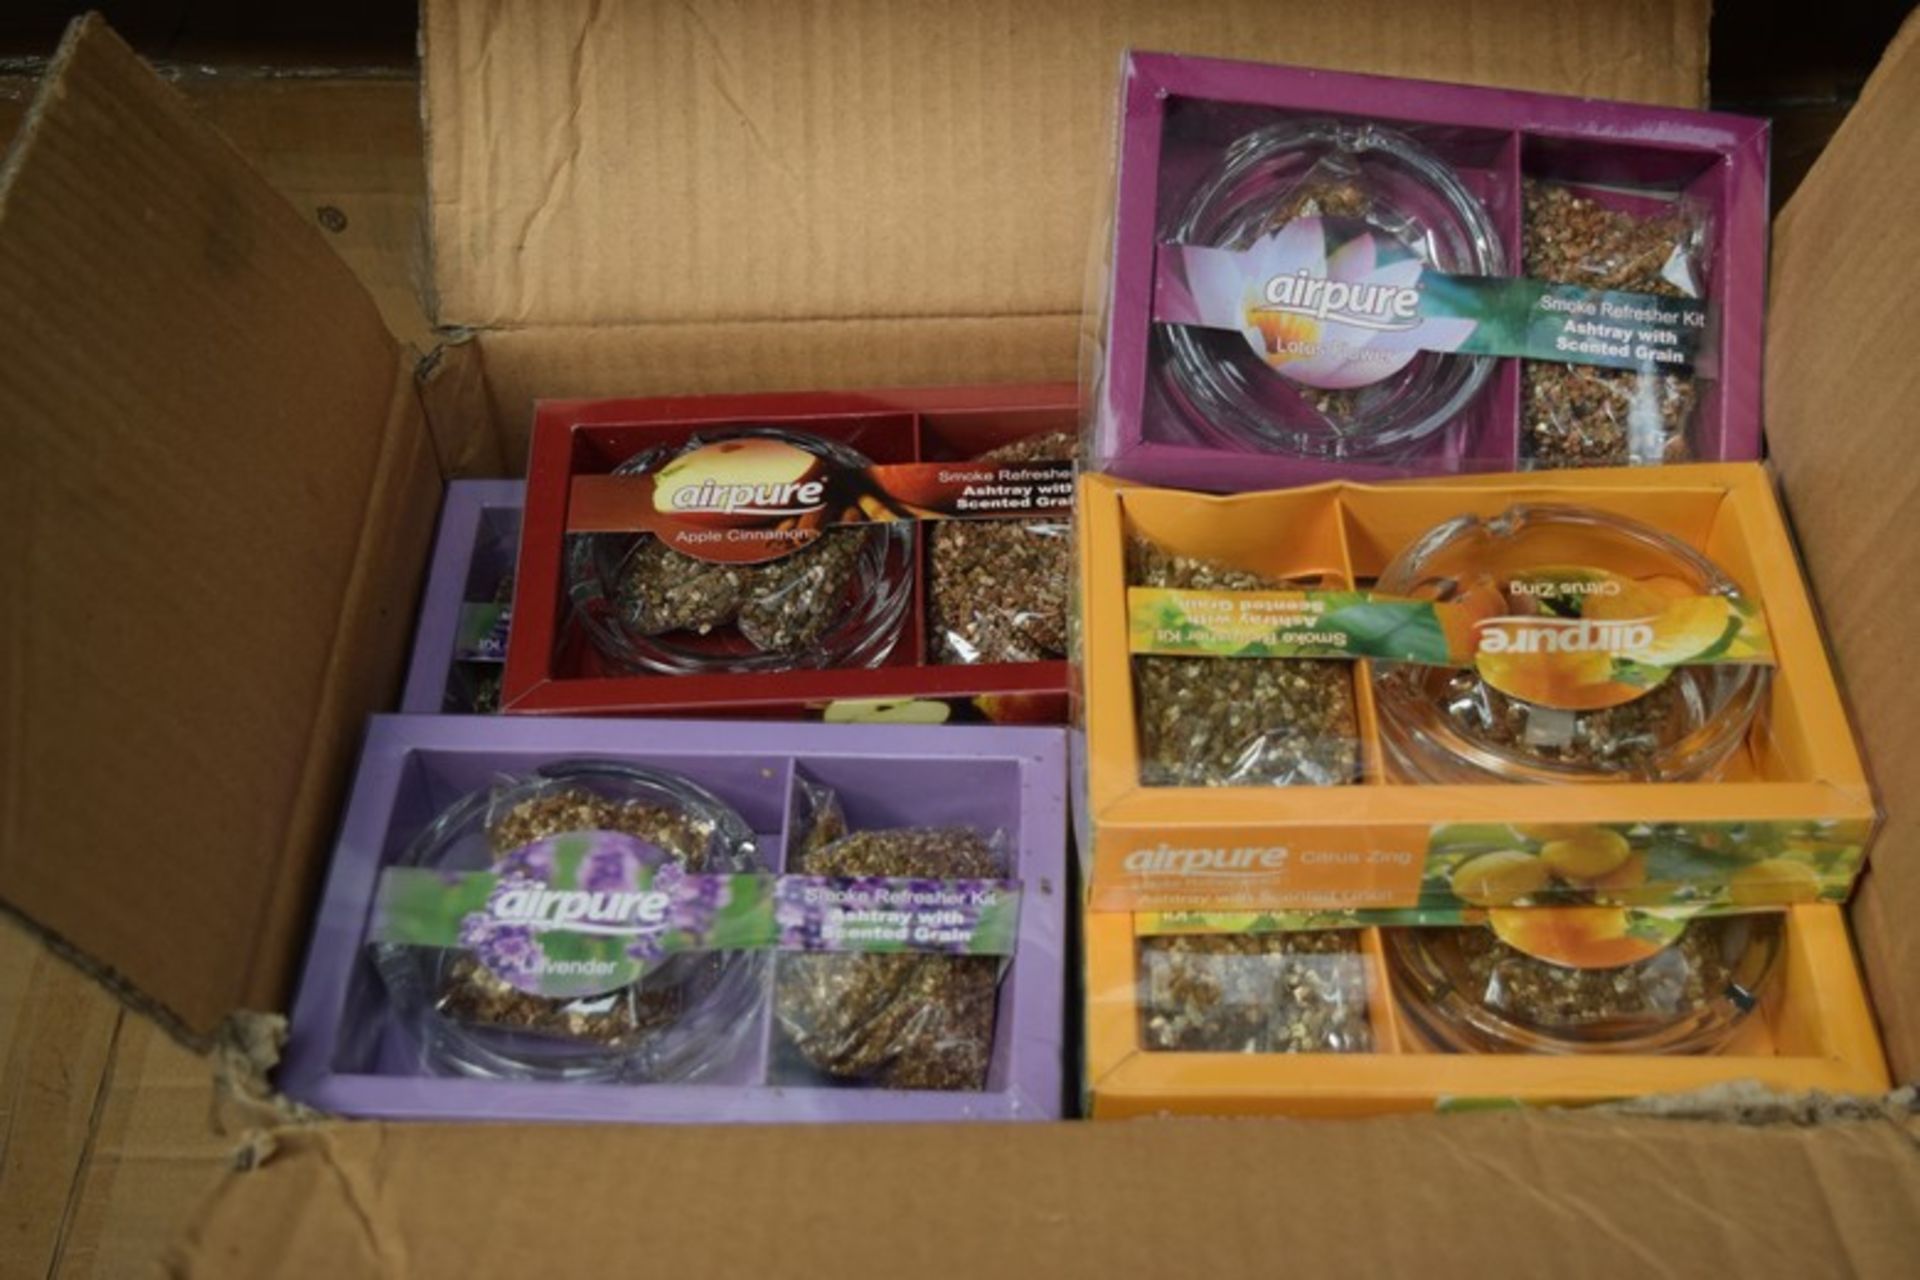 1 X BOX CONTAINING 24 BOXES OF PURE SMOKE FREE REFRESHER KIT FRAGRANCE LAVENDER AND LOTUS FLOWER,